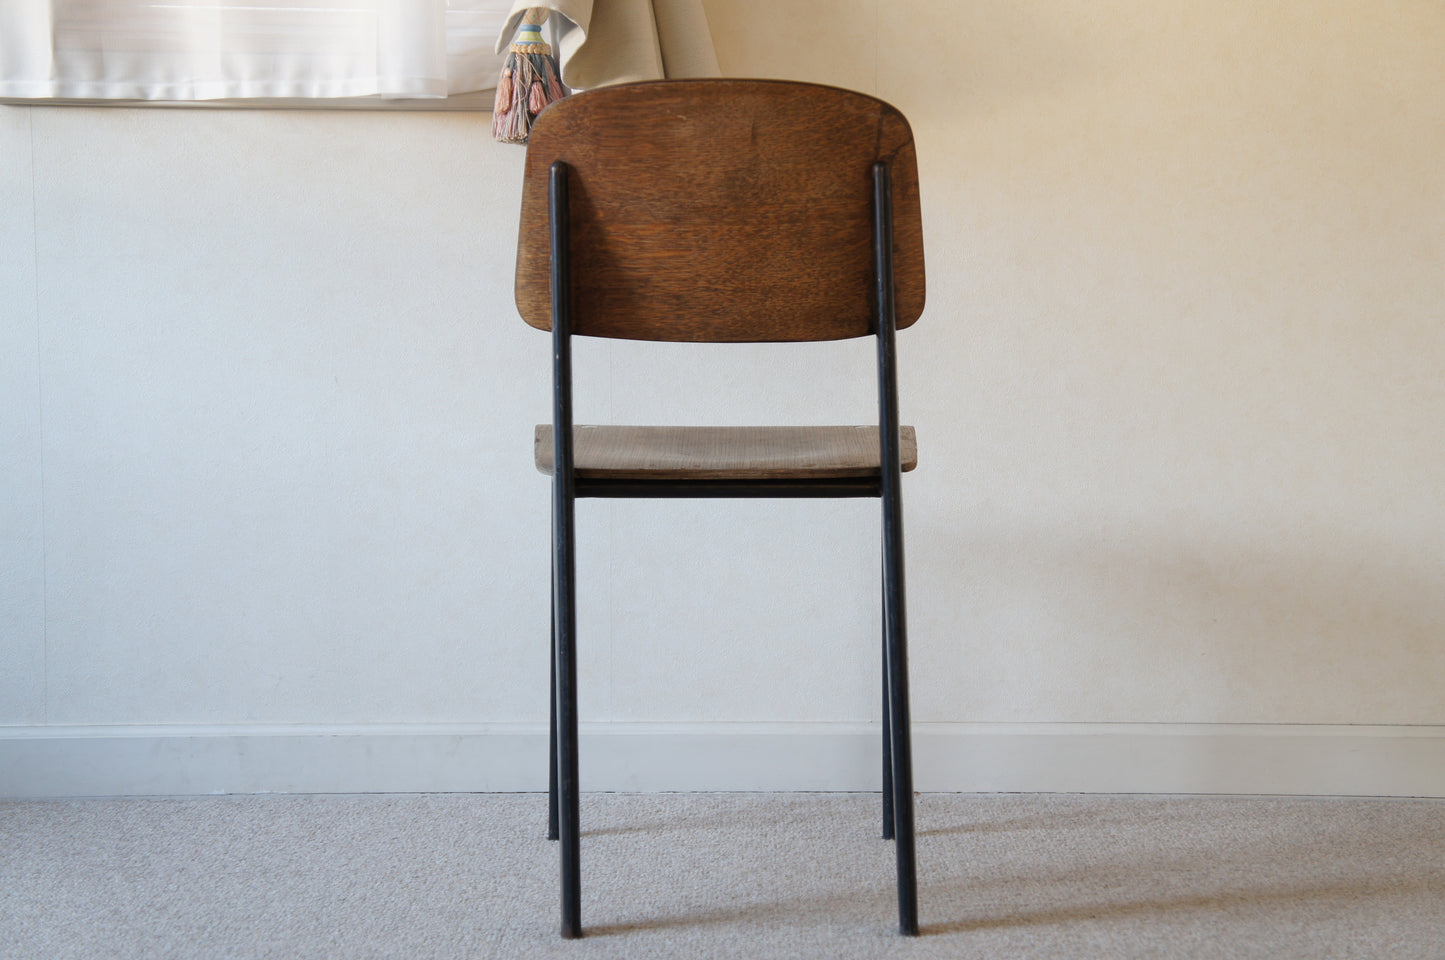 Standard Chair(Metropole305) by Jean Prouve〜Price Ask〜